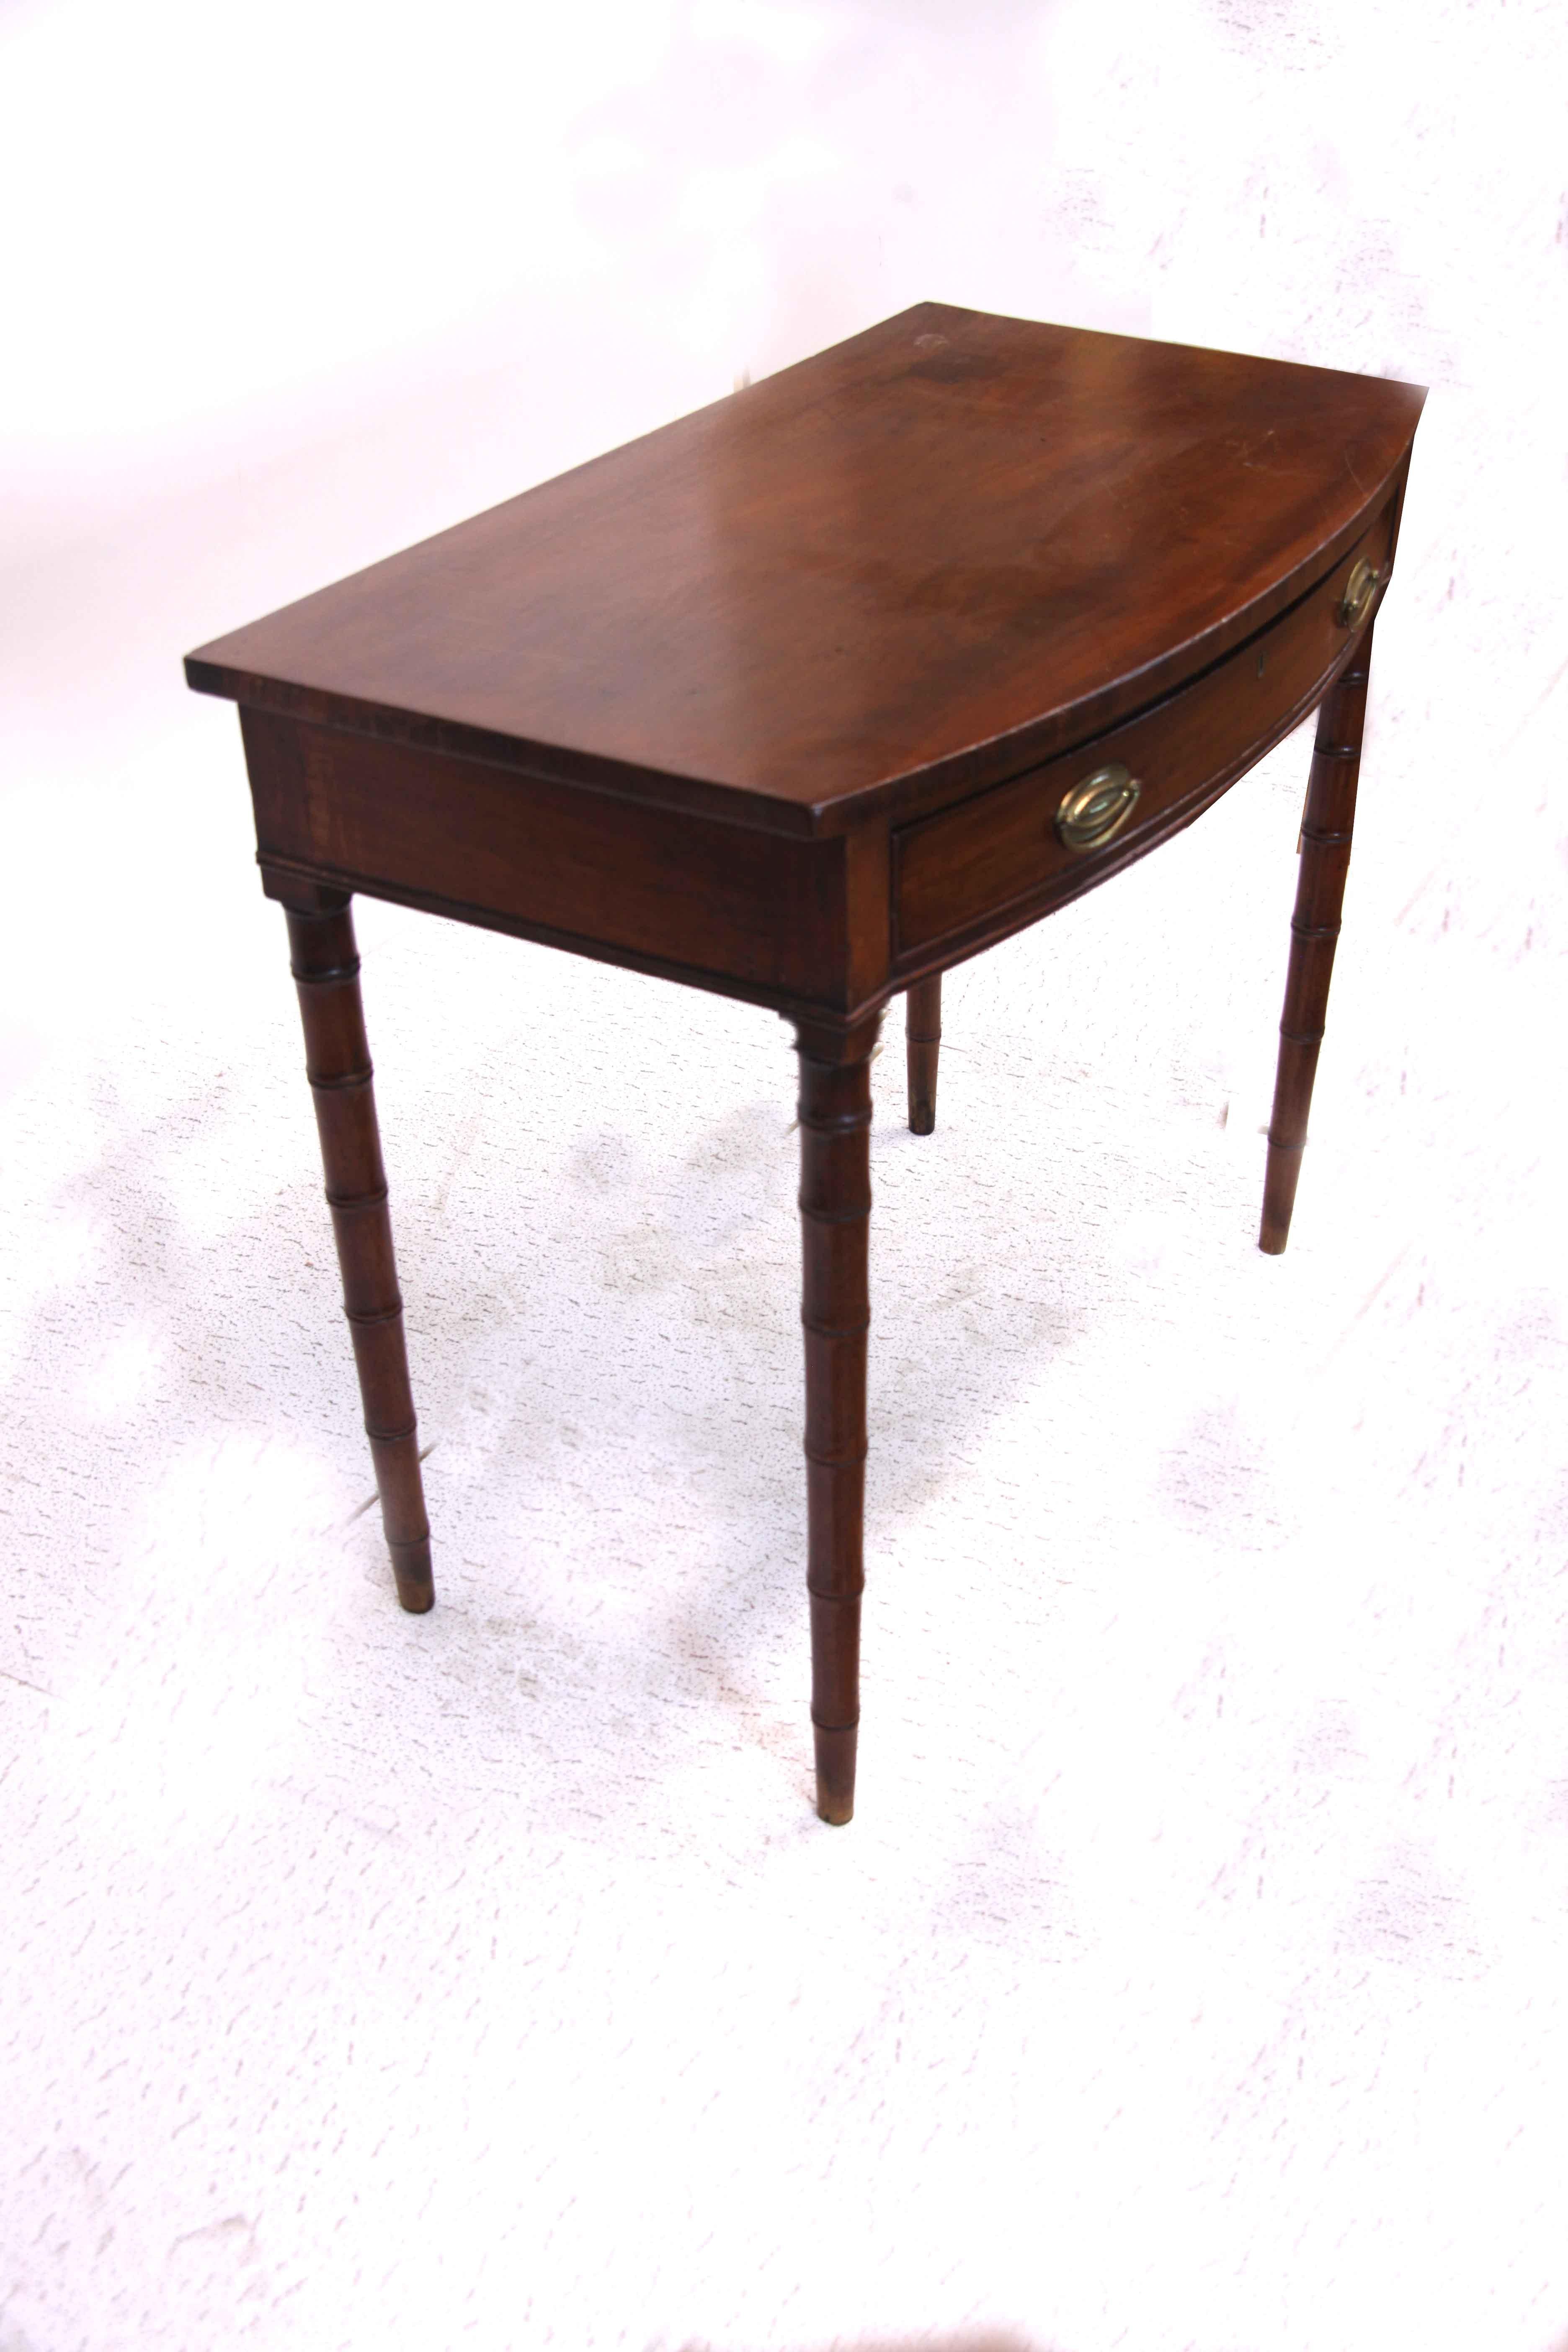 Mahogany faux bamboo bow front table, the one drawer has oval brass pulls ( hand made but not original) , the top has a nice warm color and patina, the tapered leg with crisp bamboo turnings. We do not use the term ''rare'' lightly; we have had